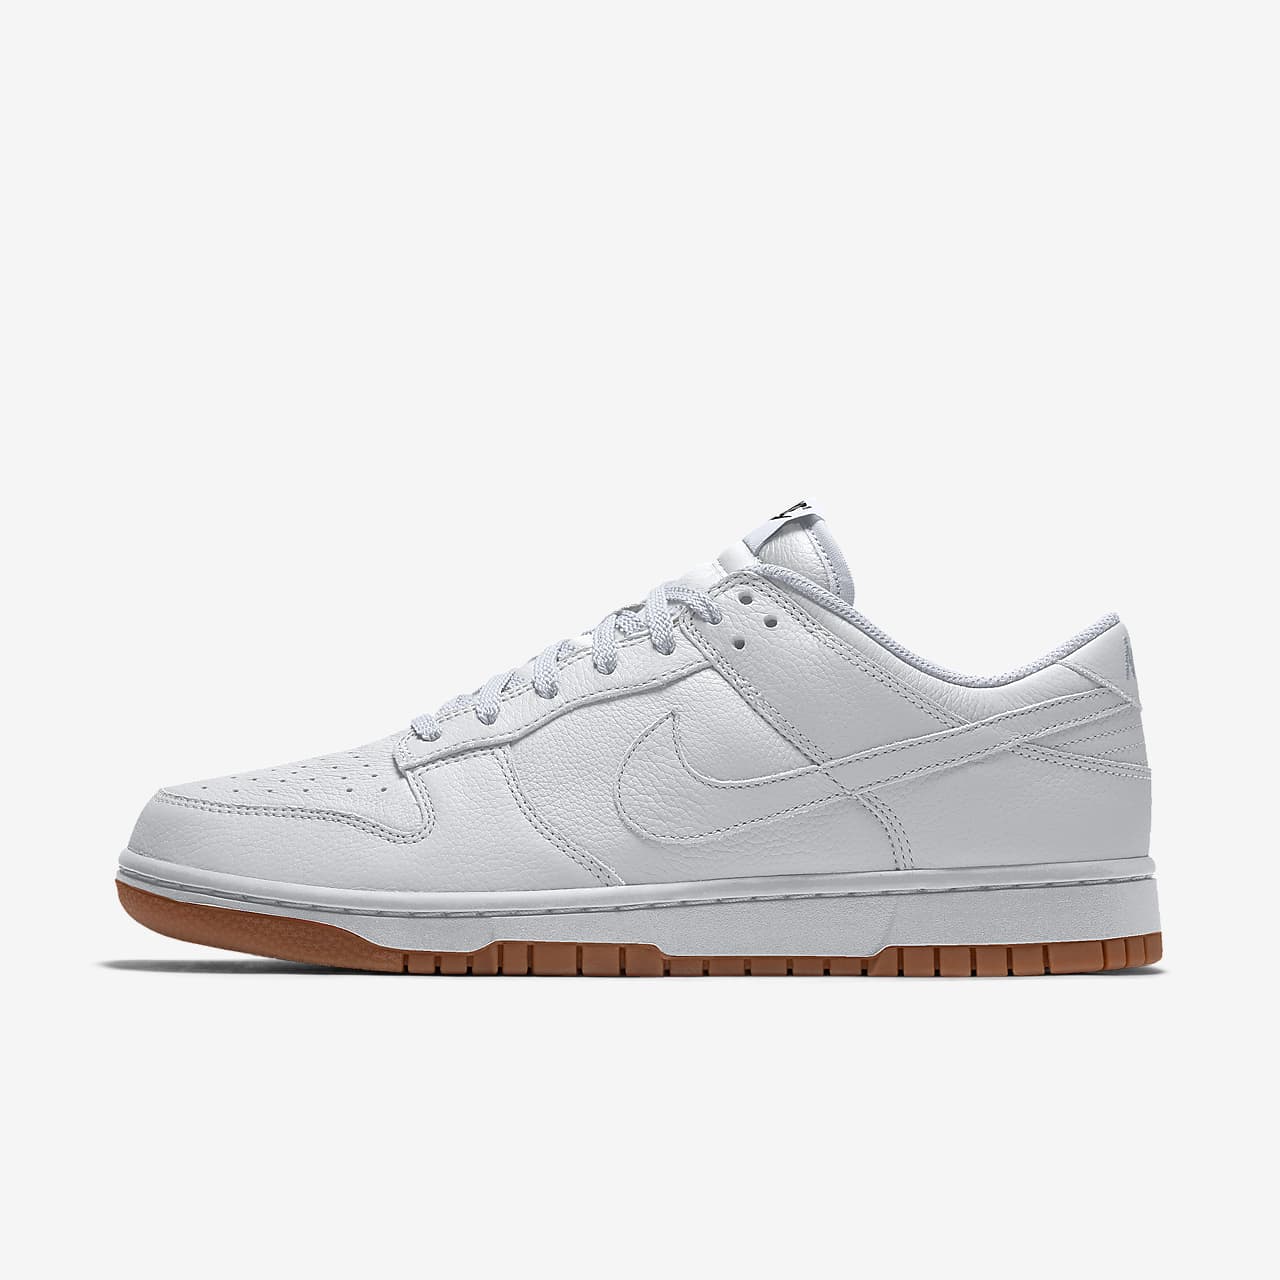 Nike dunk by you low ggsb